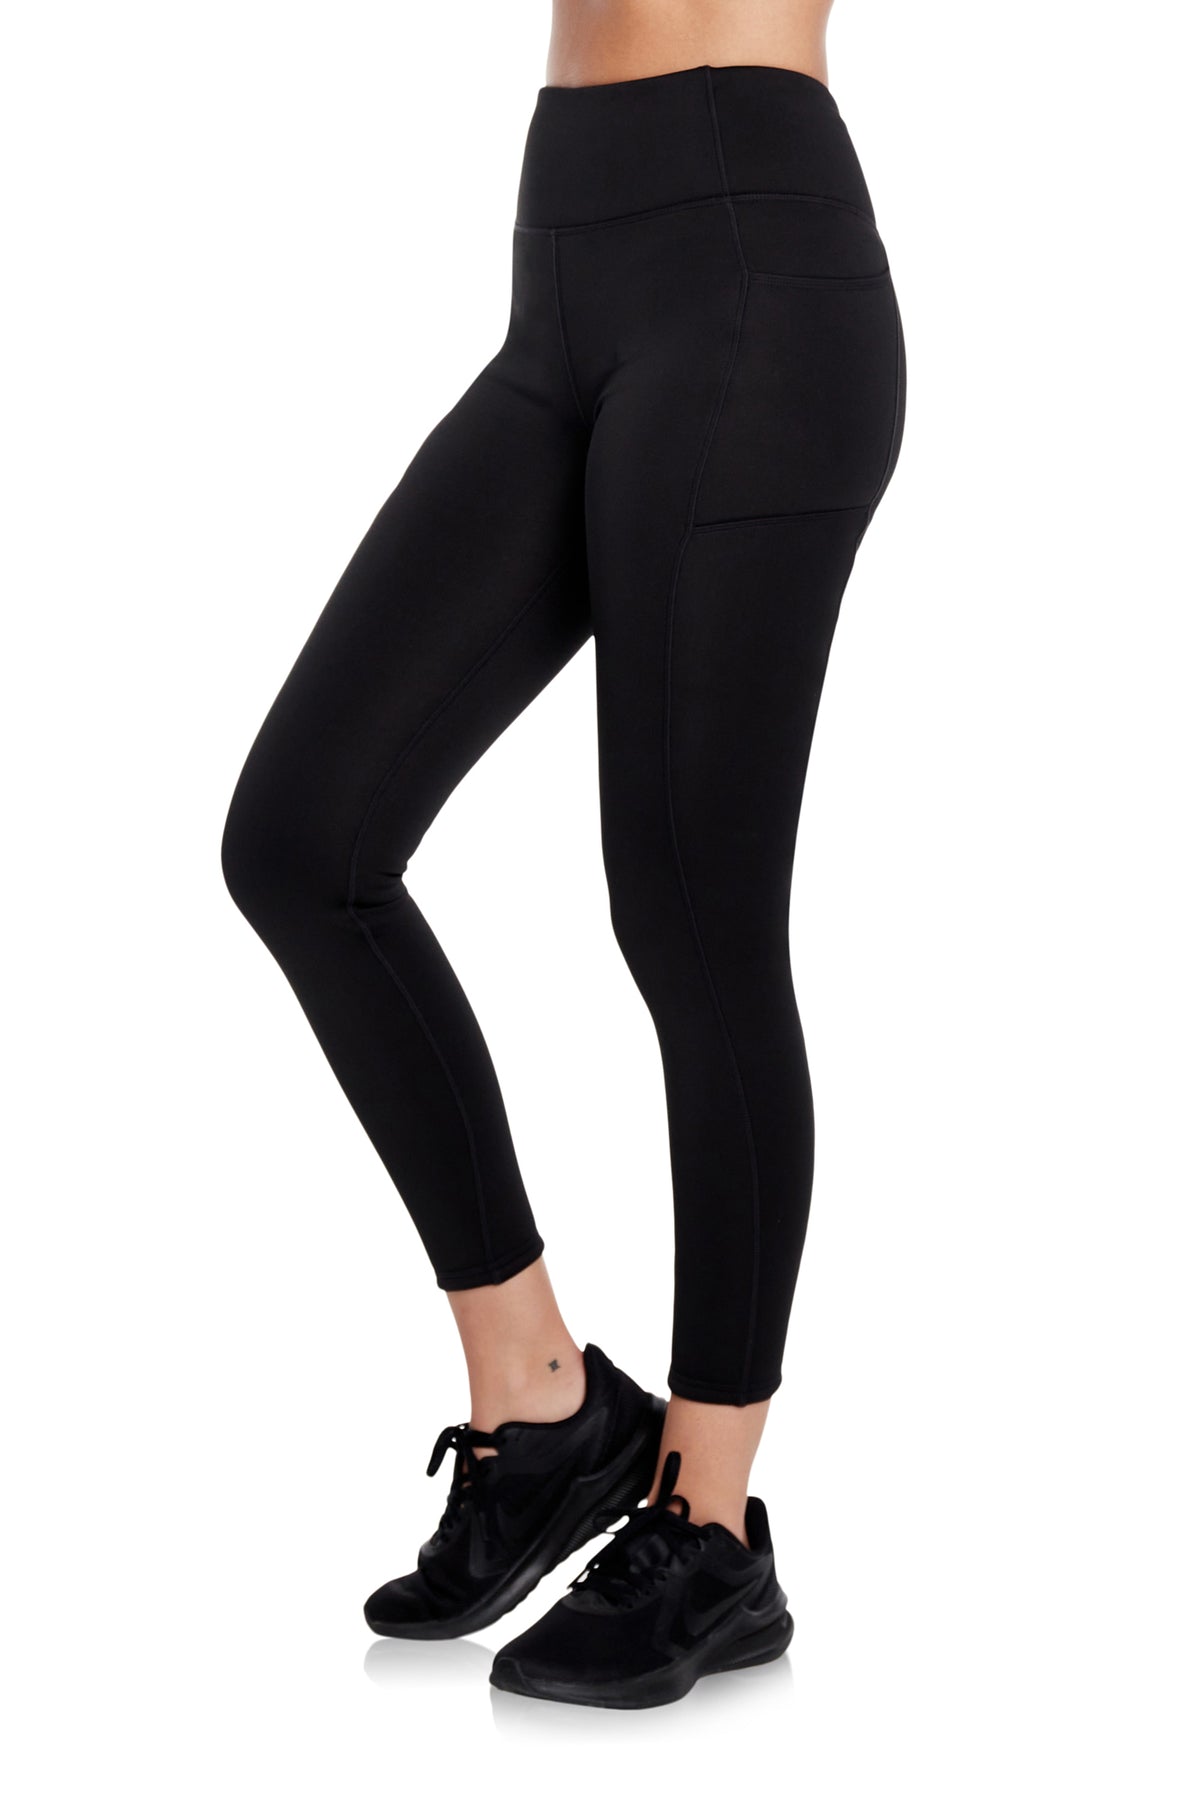 DENGDENG Womens Tights And Leggings Fleece Lined High Waisted